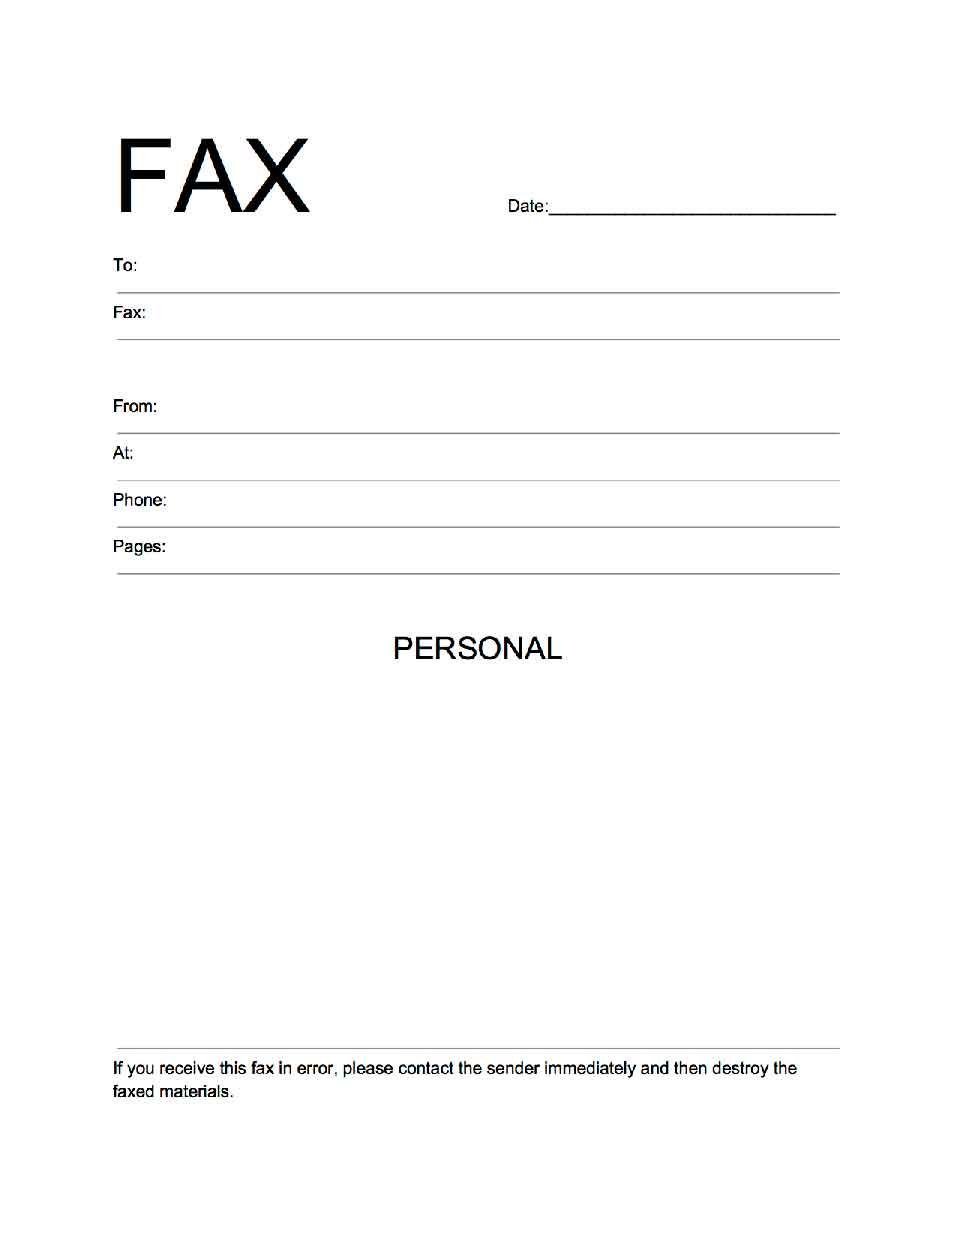 Fax Cover Letter Template Personal Fax Cover Sheet Template